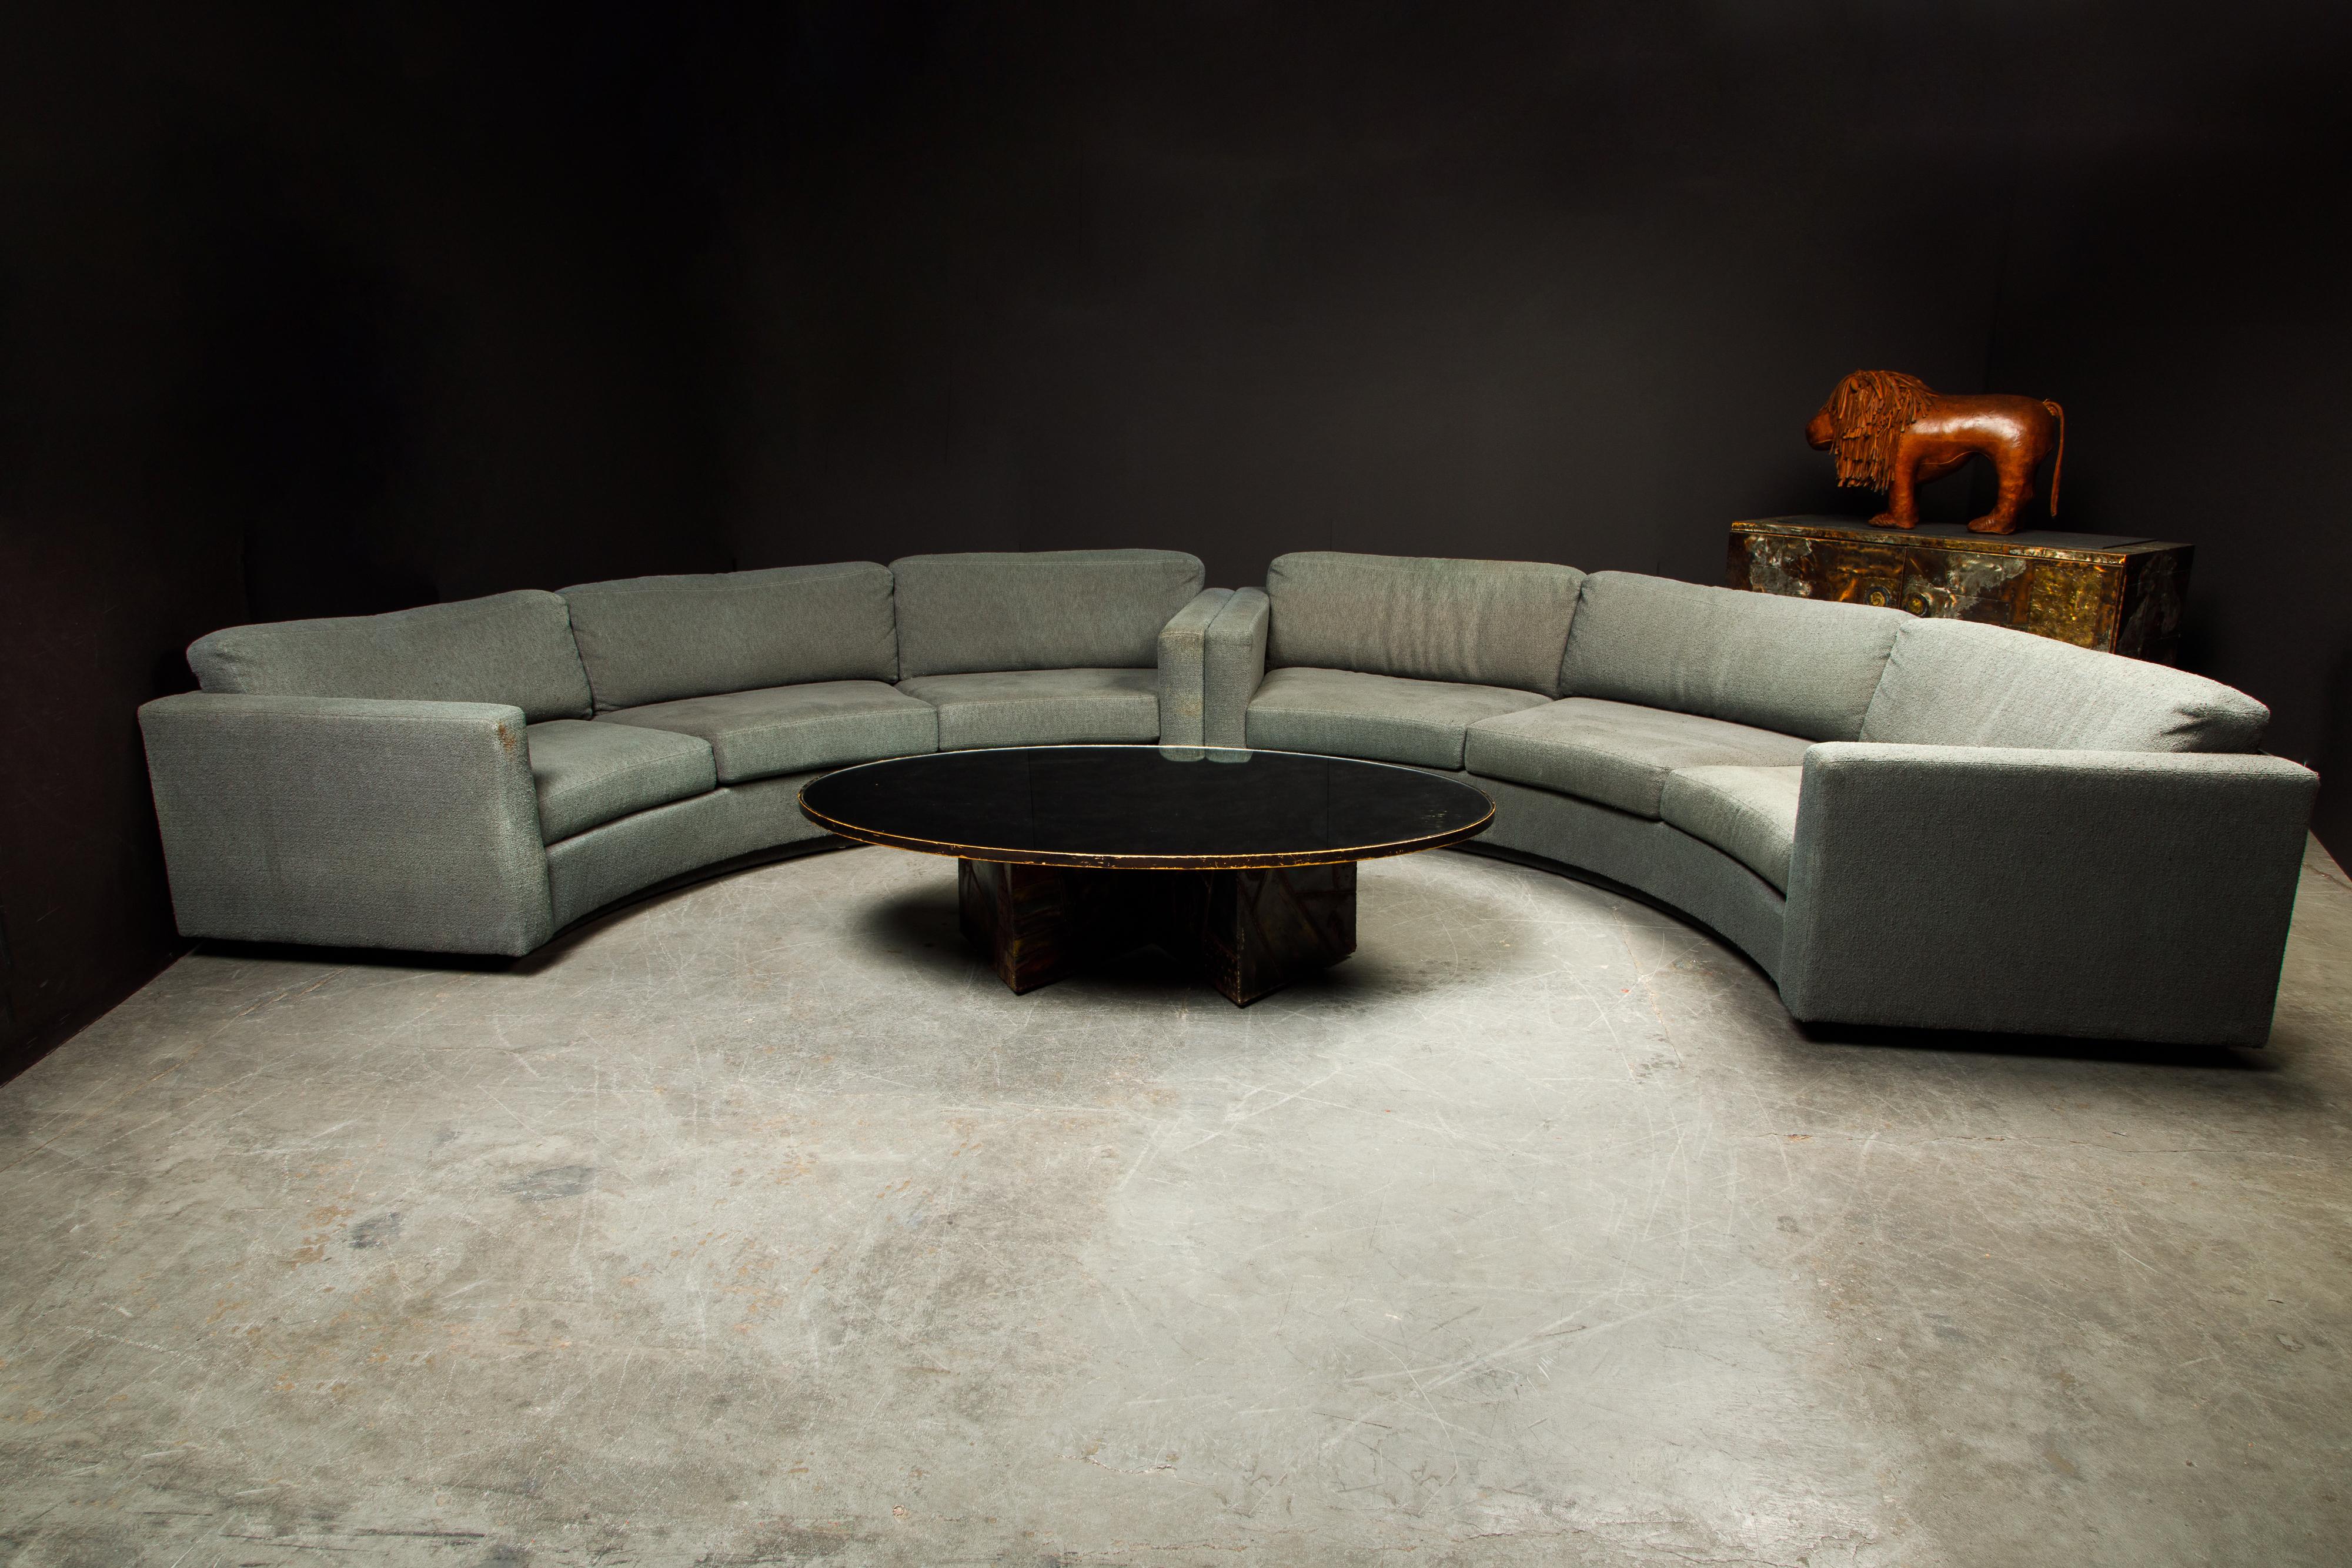 This large two piece sectional sofa by Milo Baughman for Thayer Coggin features his signature curved semi-circle design on a plinth base. Signed with Thayer Coggin labels. Fantastic option to use in a conversation pit along with a round coffee table